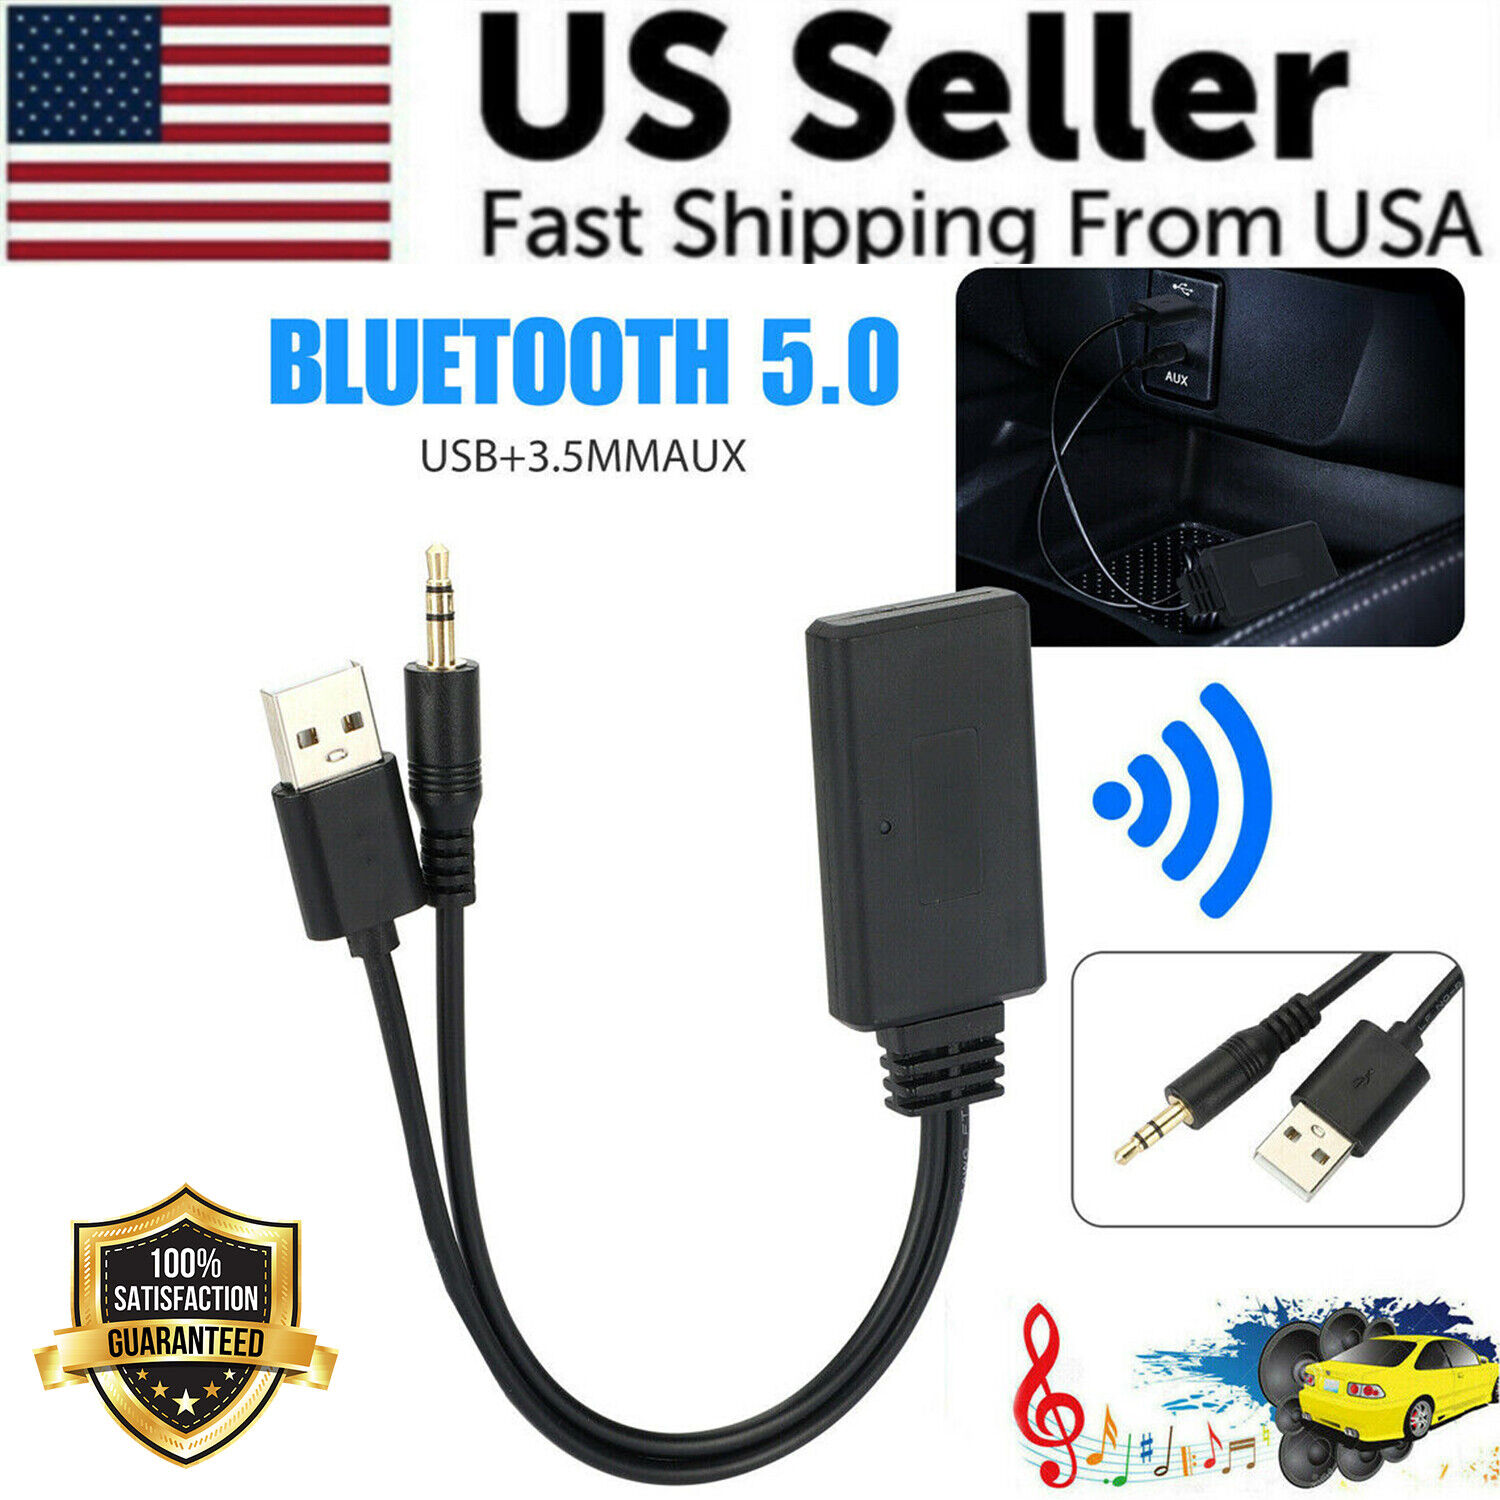 2 In 1 USB Bluetooth 5.0 Transmitter Receiver Adapter Wireless For PC Car Kit